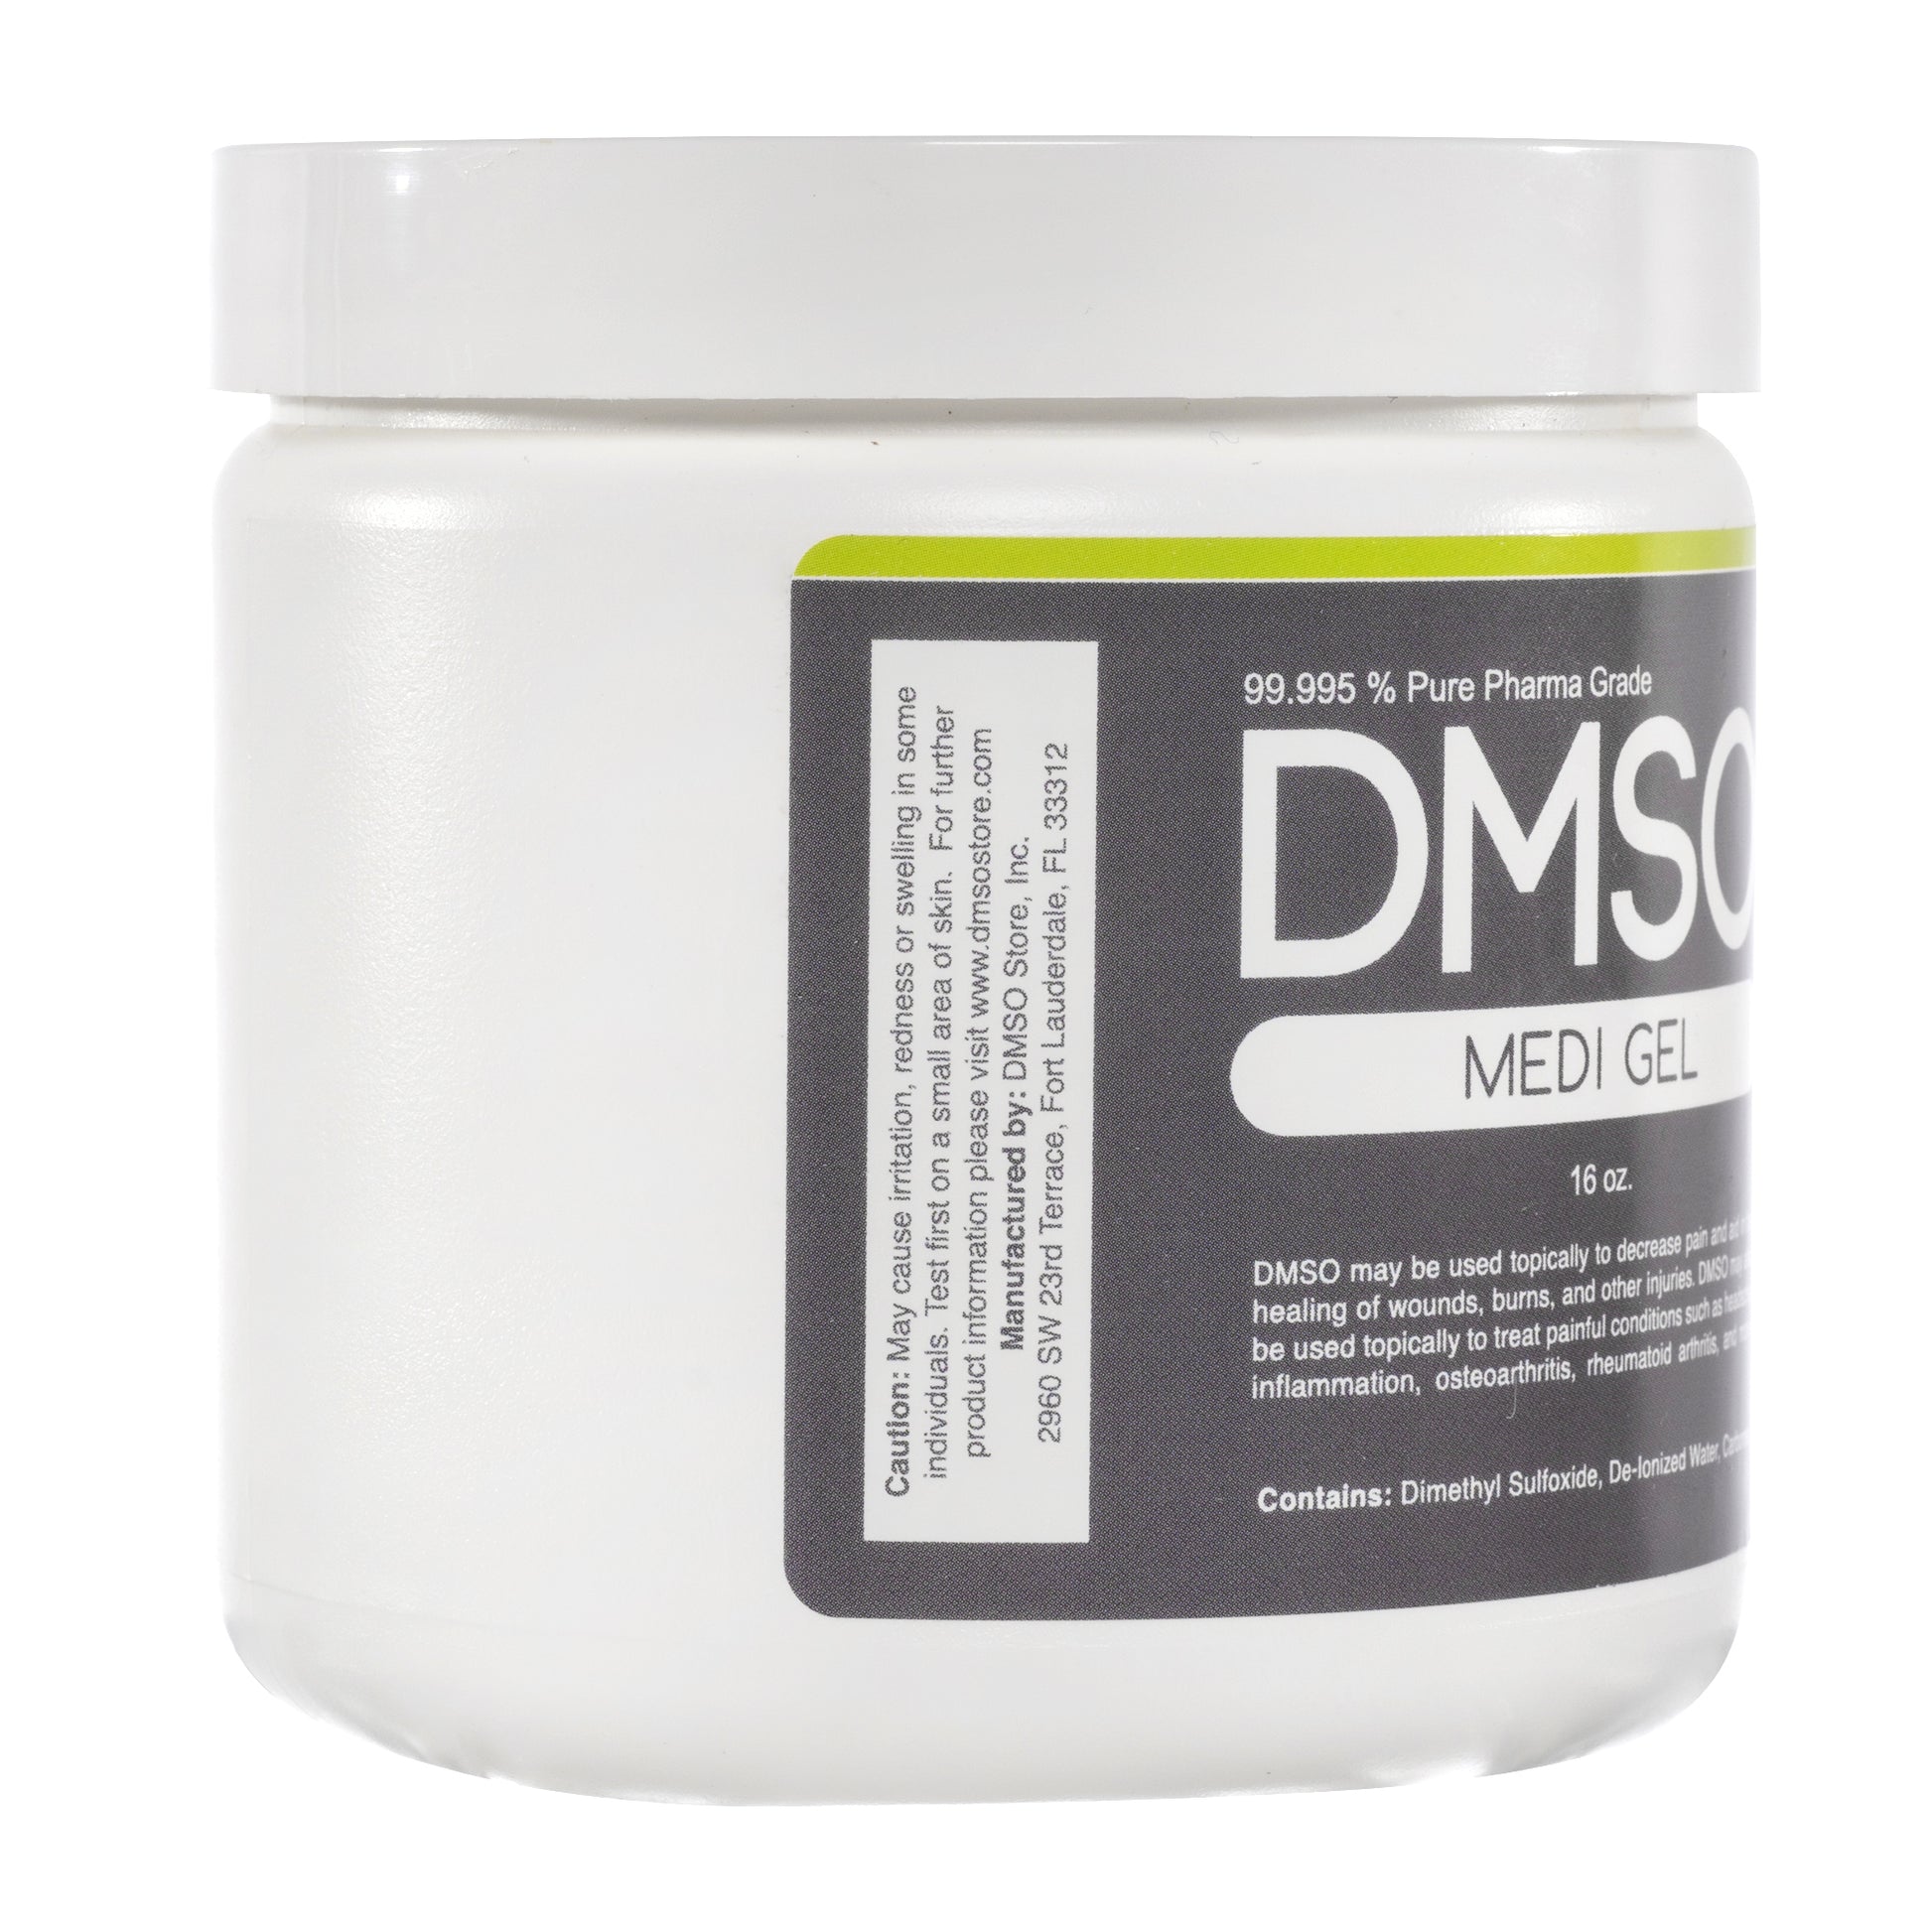 Side view of a White 16 oz jar with white twist on lid. Label reads 99.995% Pure pharma grade DMSO Medi Gel 16 oz. DMSO may be used topically to decrease pain and aid in the healing of wounds,burns and other injuries. DMSO may also be used topically to treat painful conditions such as headache,inflammation, osteoarthritis, rheumatoid arthritis and more. Contains: Dimethyl Sulfoxide, De-Ionized water, Carbomer